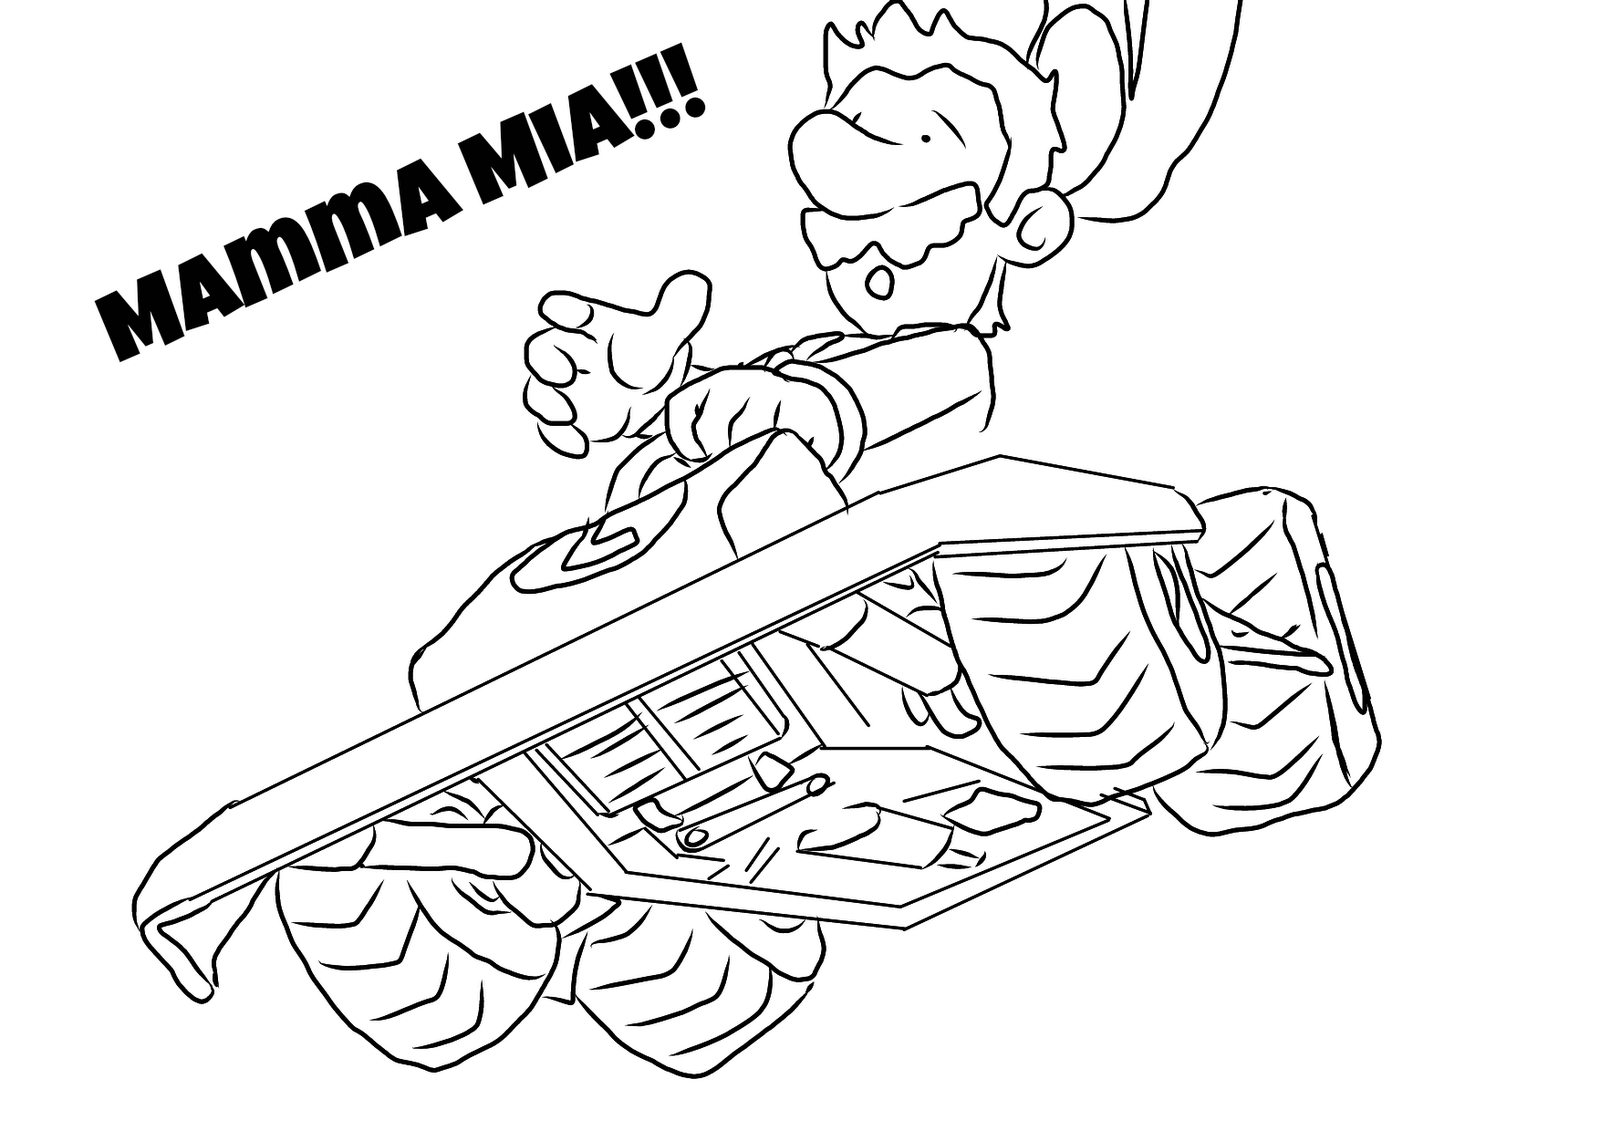 mario kart wii coloring pages mario kart wii coloring pages pages wii coloring kart mario 